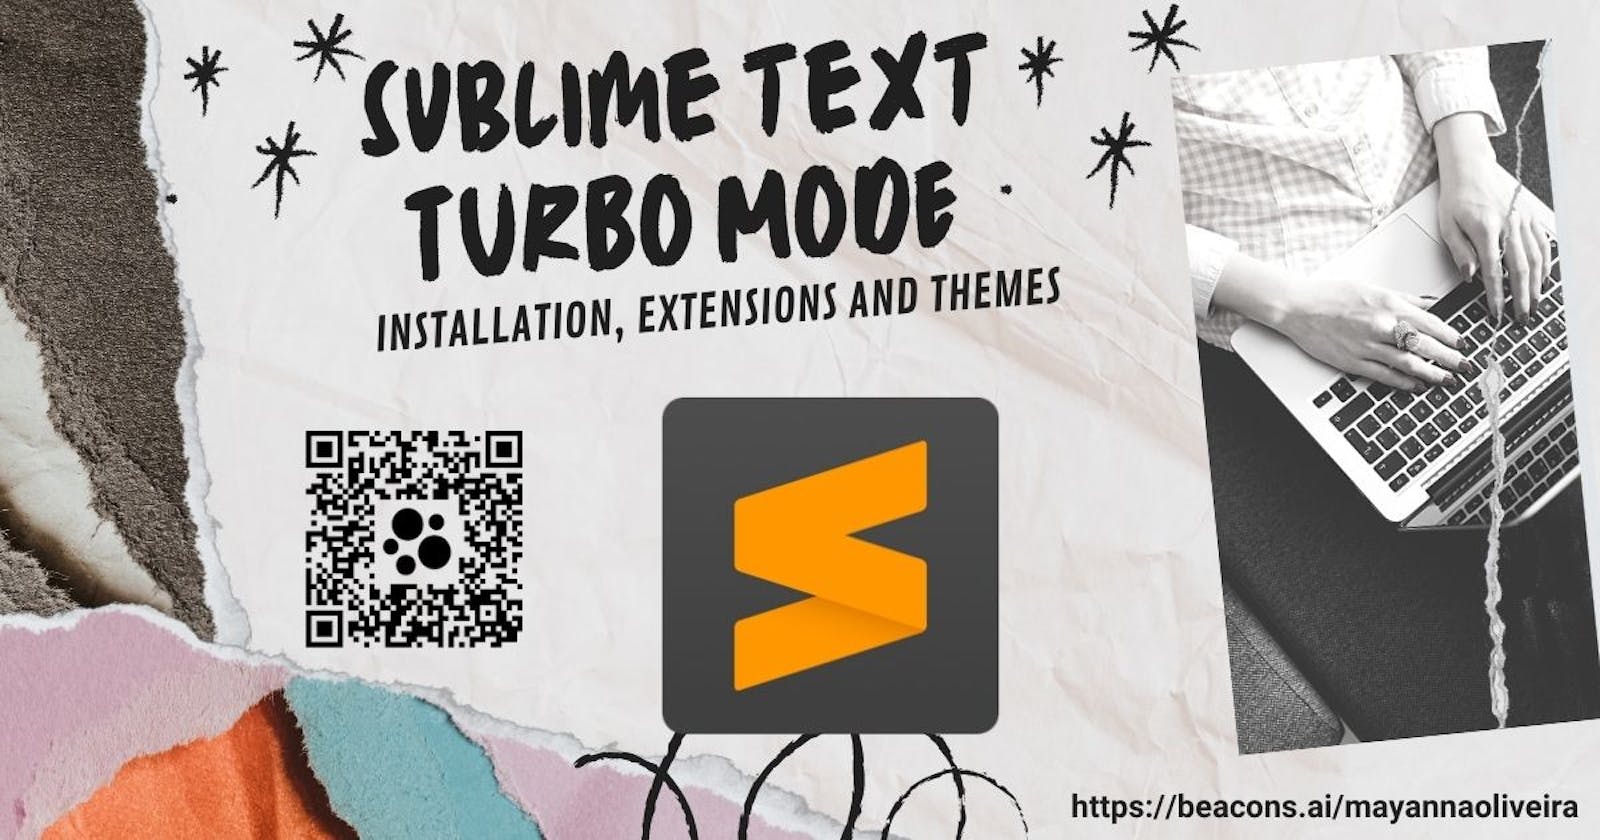 Sublime Text Turbo Mode